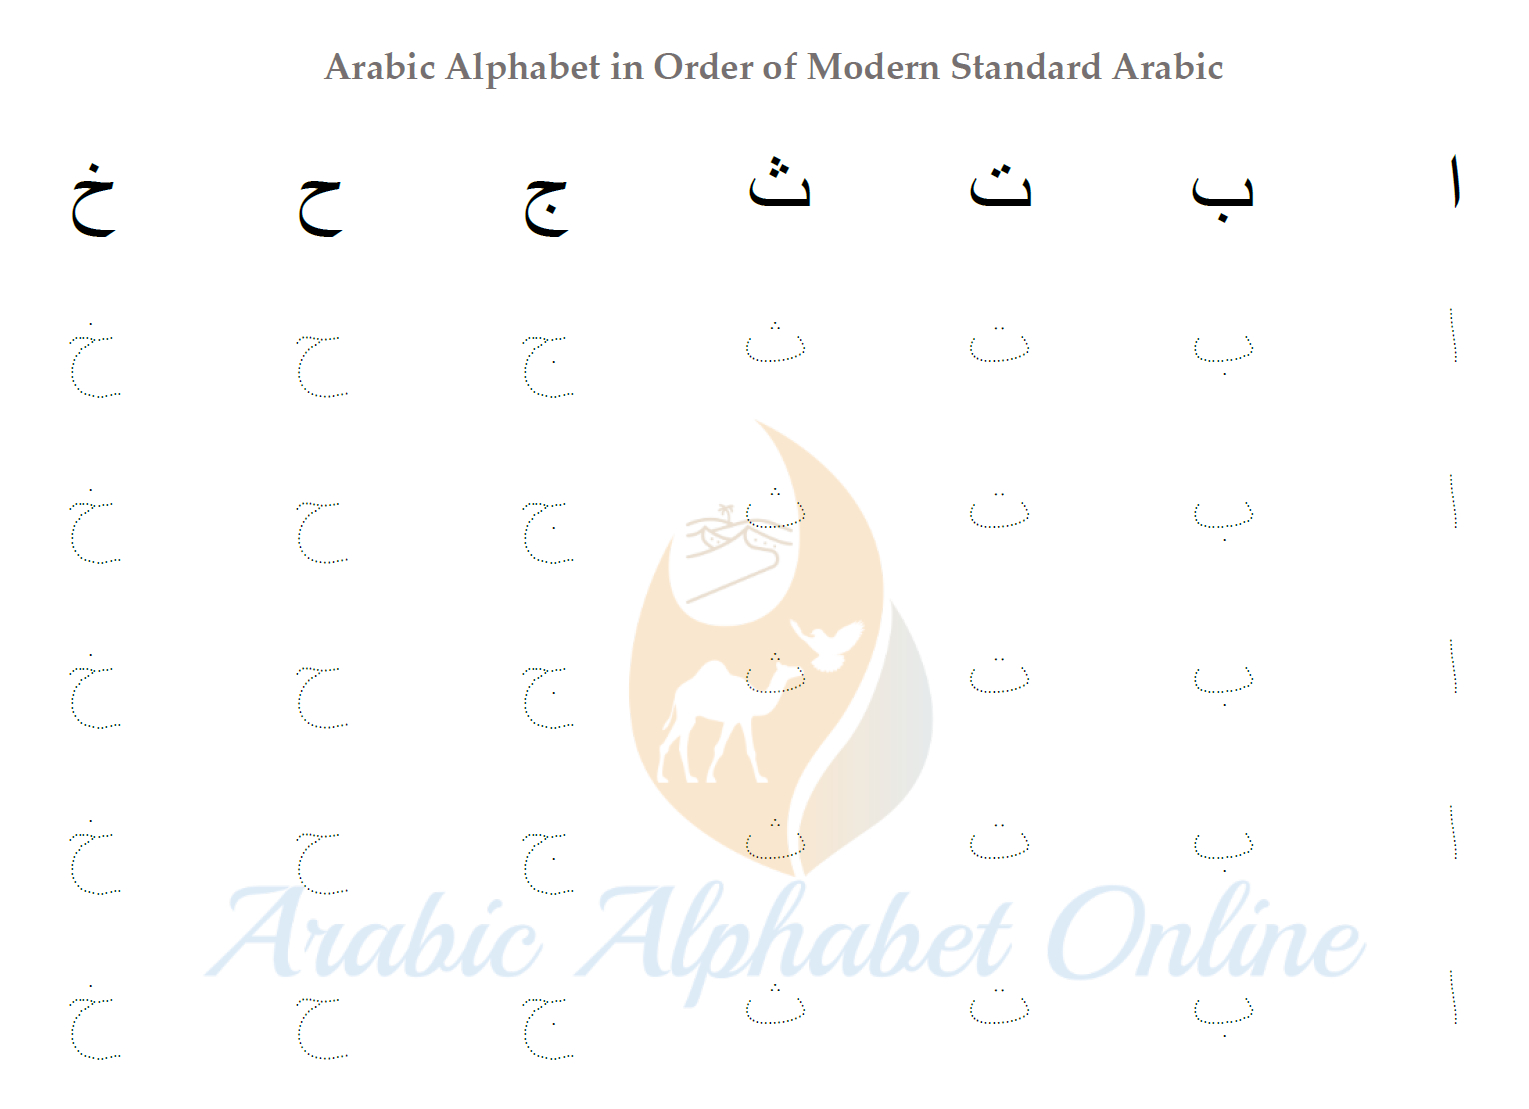 Arabic Alphabet Tracing Worksheets | Arabic Alphabet Online throughout Arabic Letters Tracing Sheets